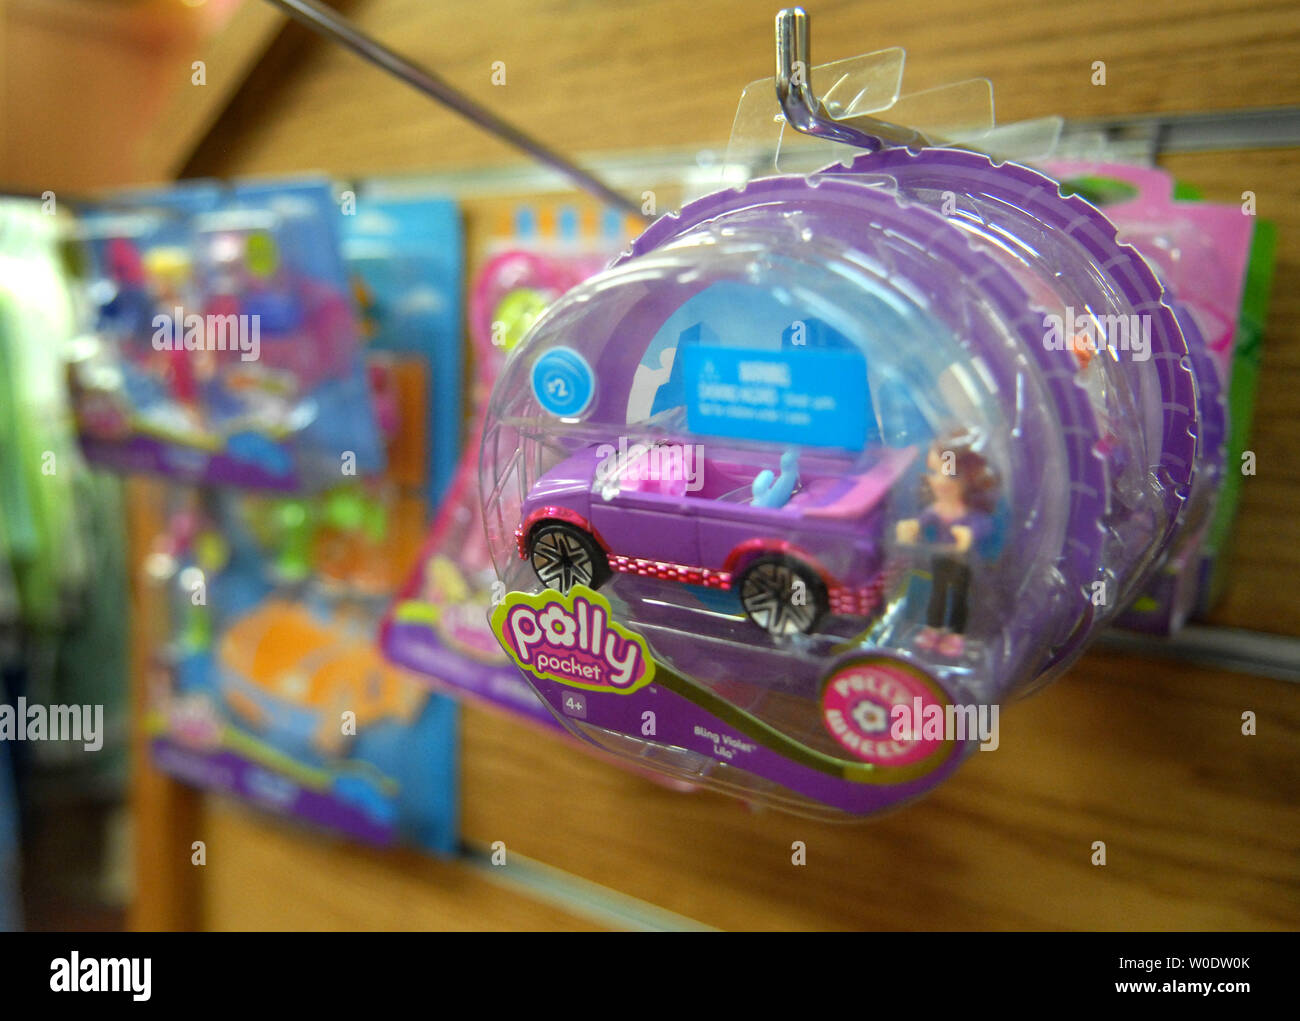 Polly Pocket toys are seen on display at Kinder Haus Toy store in Arlington, Virginia on August 14, 2007. Mattel recalled 9 million Chinese made toys, including Polly Pocket play sets, Batman action figures, Fisher-Price toys and some die cast cars because of the presence of lead paint or their use of tiny magnets that could cause a choking hazard. This comes after Cheung Shu-hung, co-owner of A Lee Der Chinese Toy manufacturers, committed suicide at a warehouse following a Chinese ban. (UPI Photo/Kevin Dietsch) Stock Photo